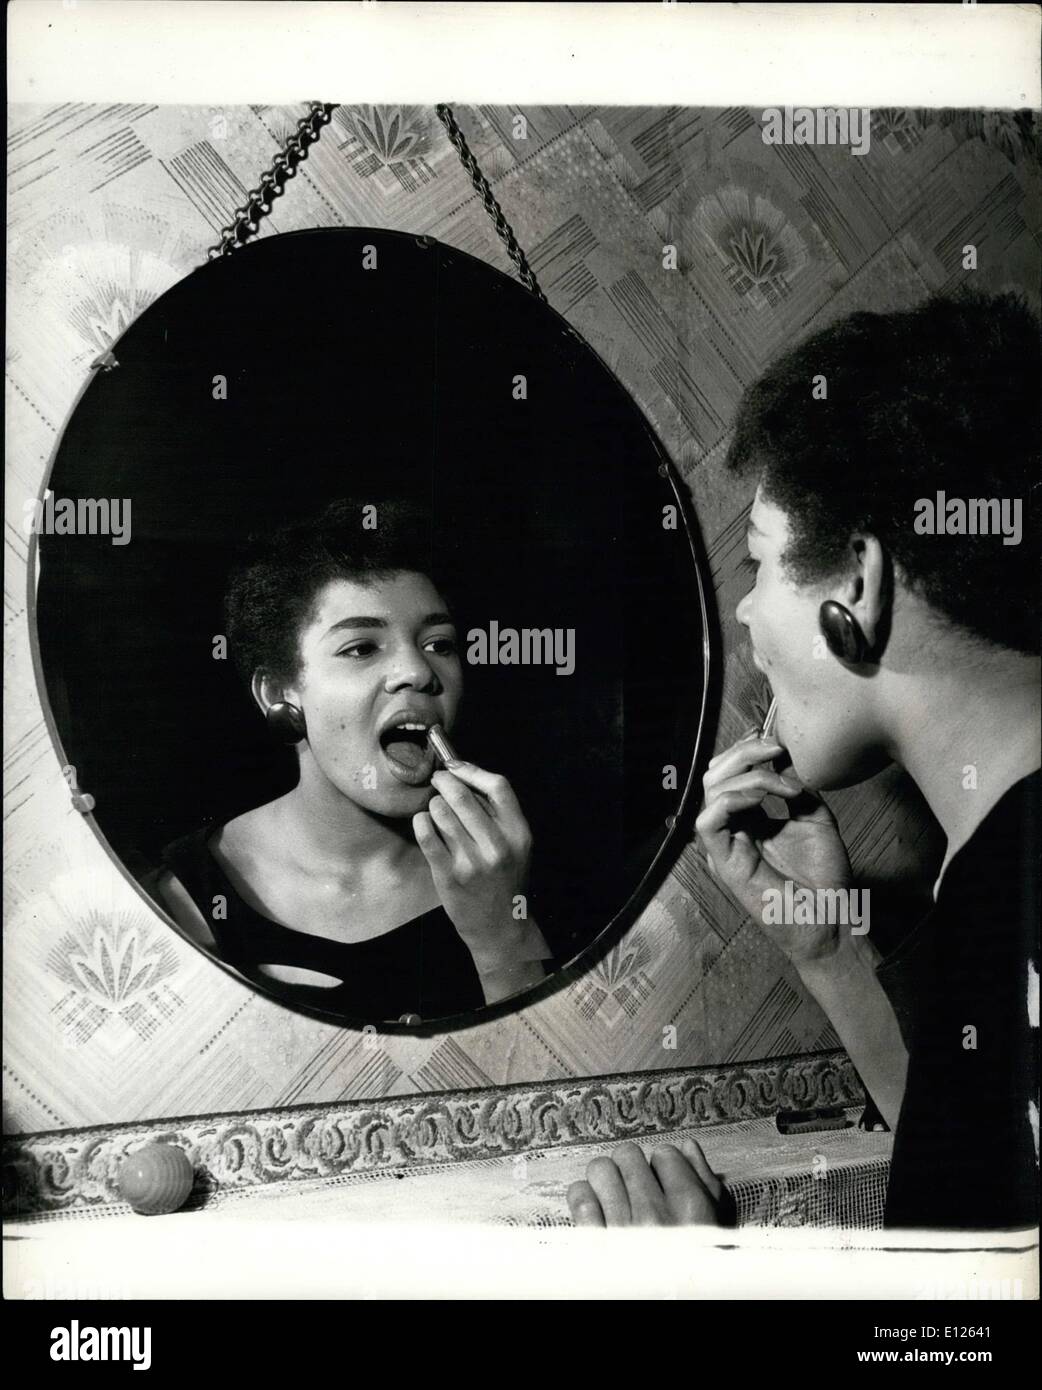 May 05, 1989 - Shirley Bassey becomes a star: Shirley makes up using the mirror in the living room of the family home in Cardiff's Tiger Bay.The girl from Cardiff ''Tiger Bay'' for Las Vegas and Hollywood Shirley Bassey on the skyway to success in the States: Britain's recently risen coloured 18-year- old blues singer from the slum dock area of Cardiff (Wales) is soon to star in Las Vegas. She leaves for America in mid-January and after starring in las Vegas will go on for film tests in Hollywood Stock Photo